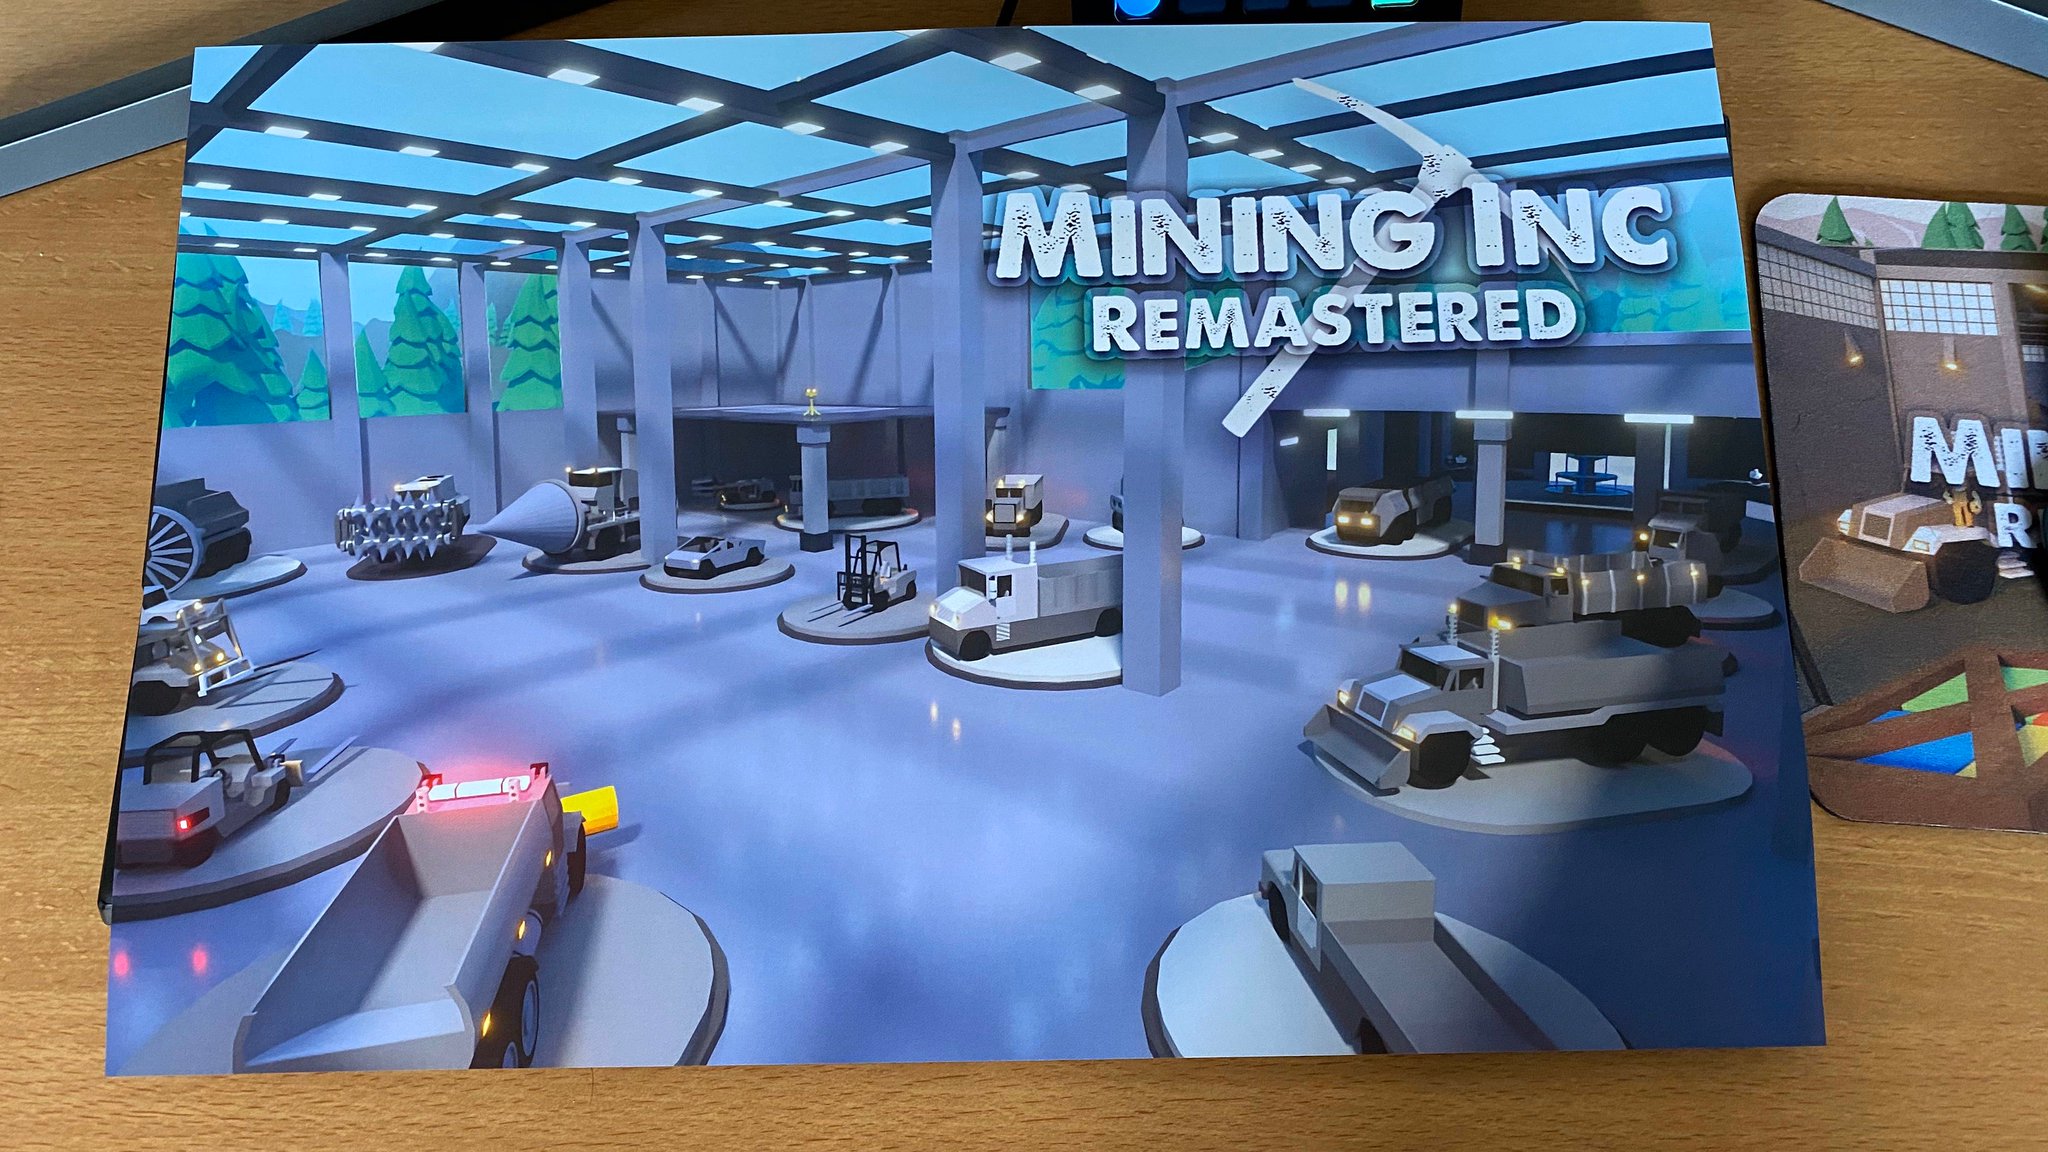 Pascal Vanderveen On Twitter Giveaway Follow Me And Rblx Mining Inc Like And Retweet This Tweet To Get A Chance Of Winning This Mining Inc Remastered Poster With A Signature Winner Will Be